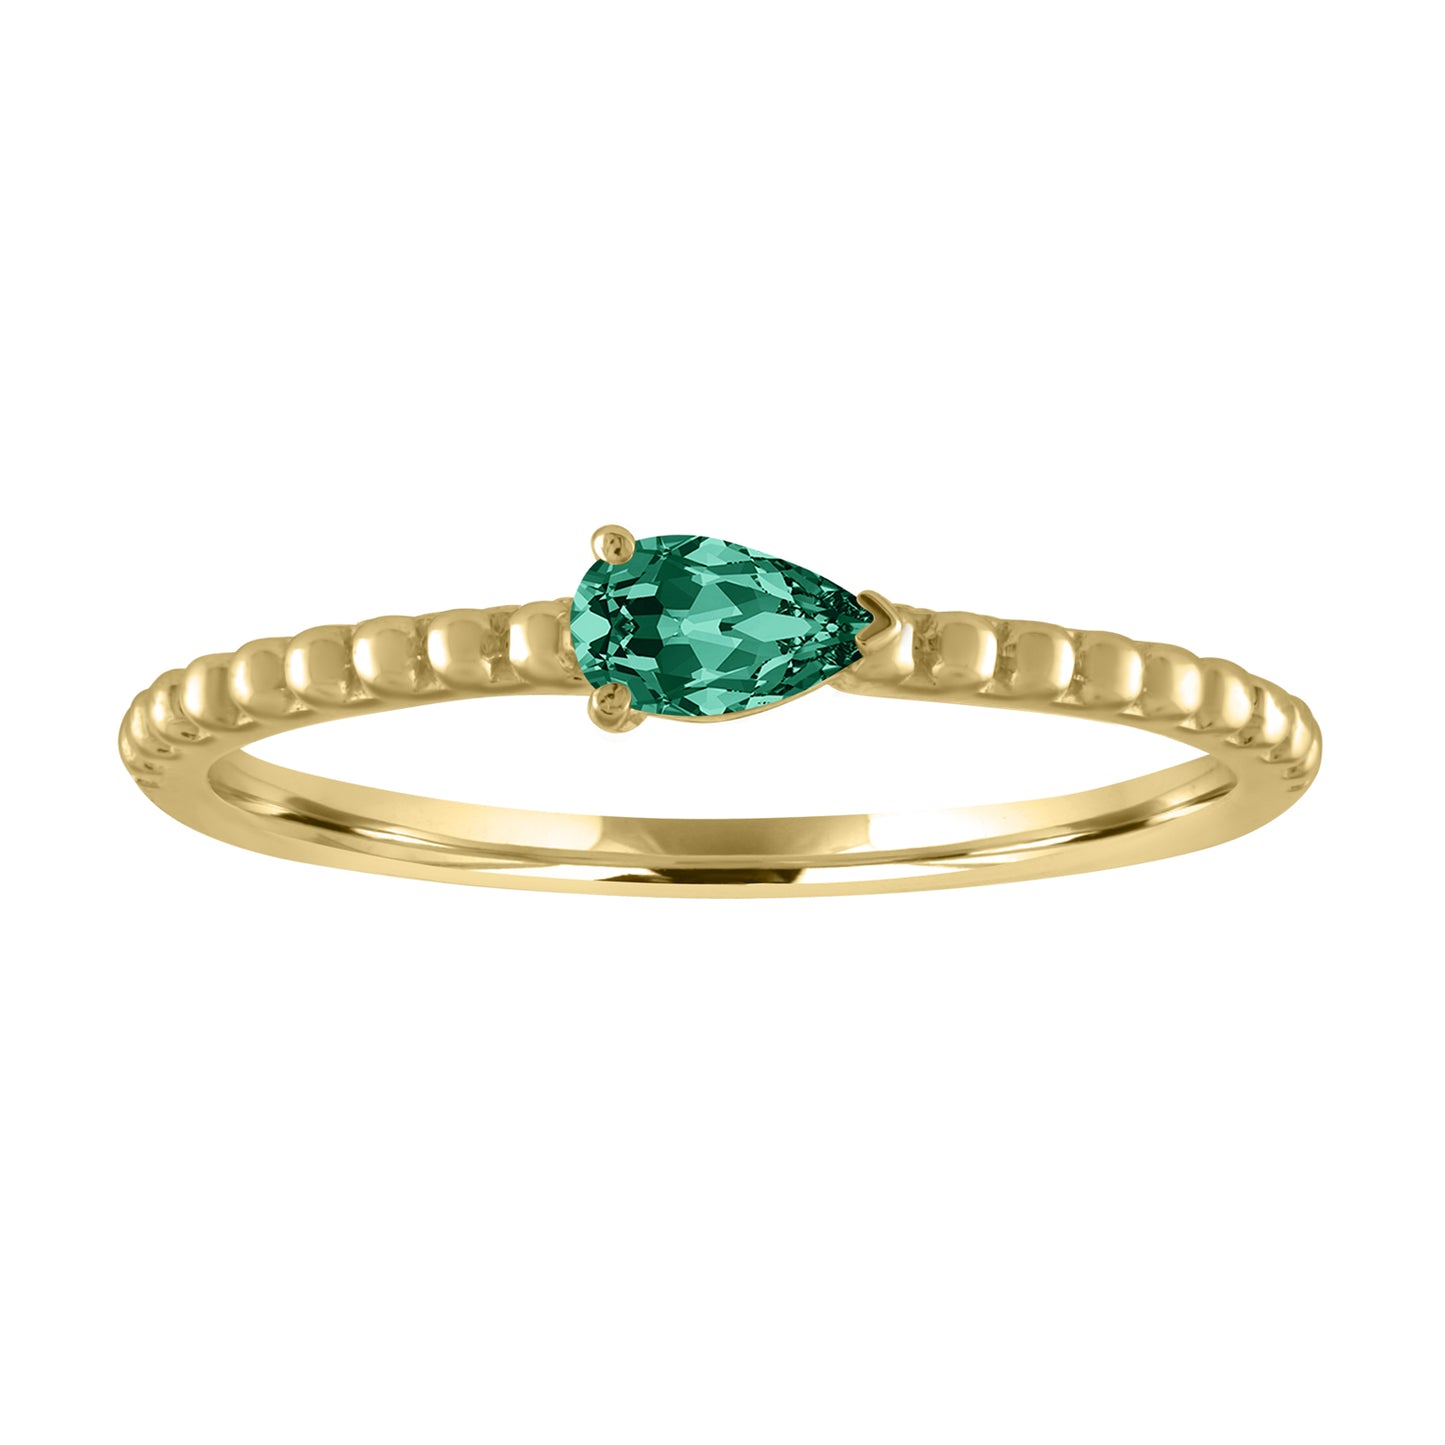 Yellow gold beaded skinny band with a pear shaped emerald in the center. 